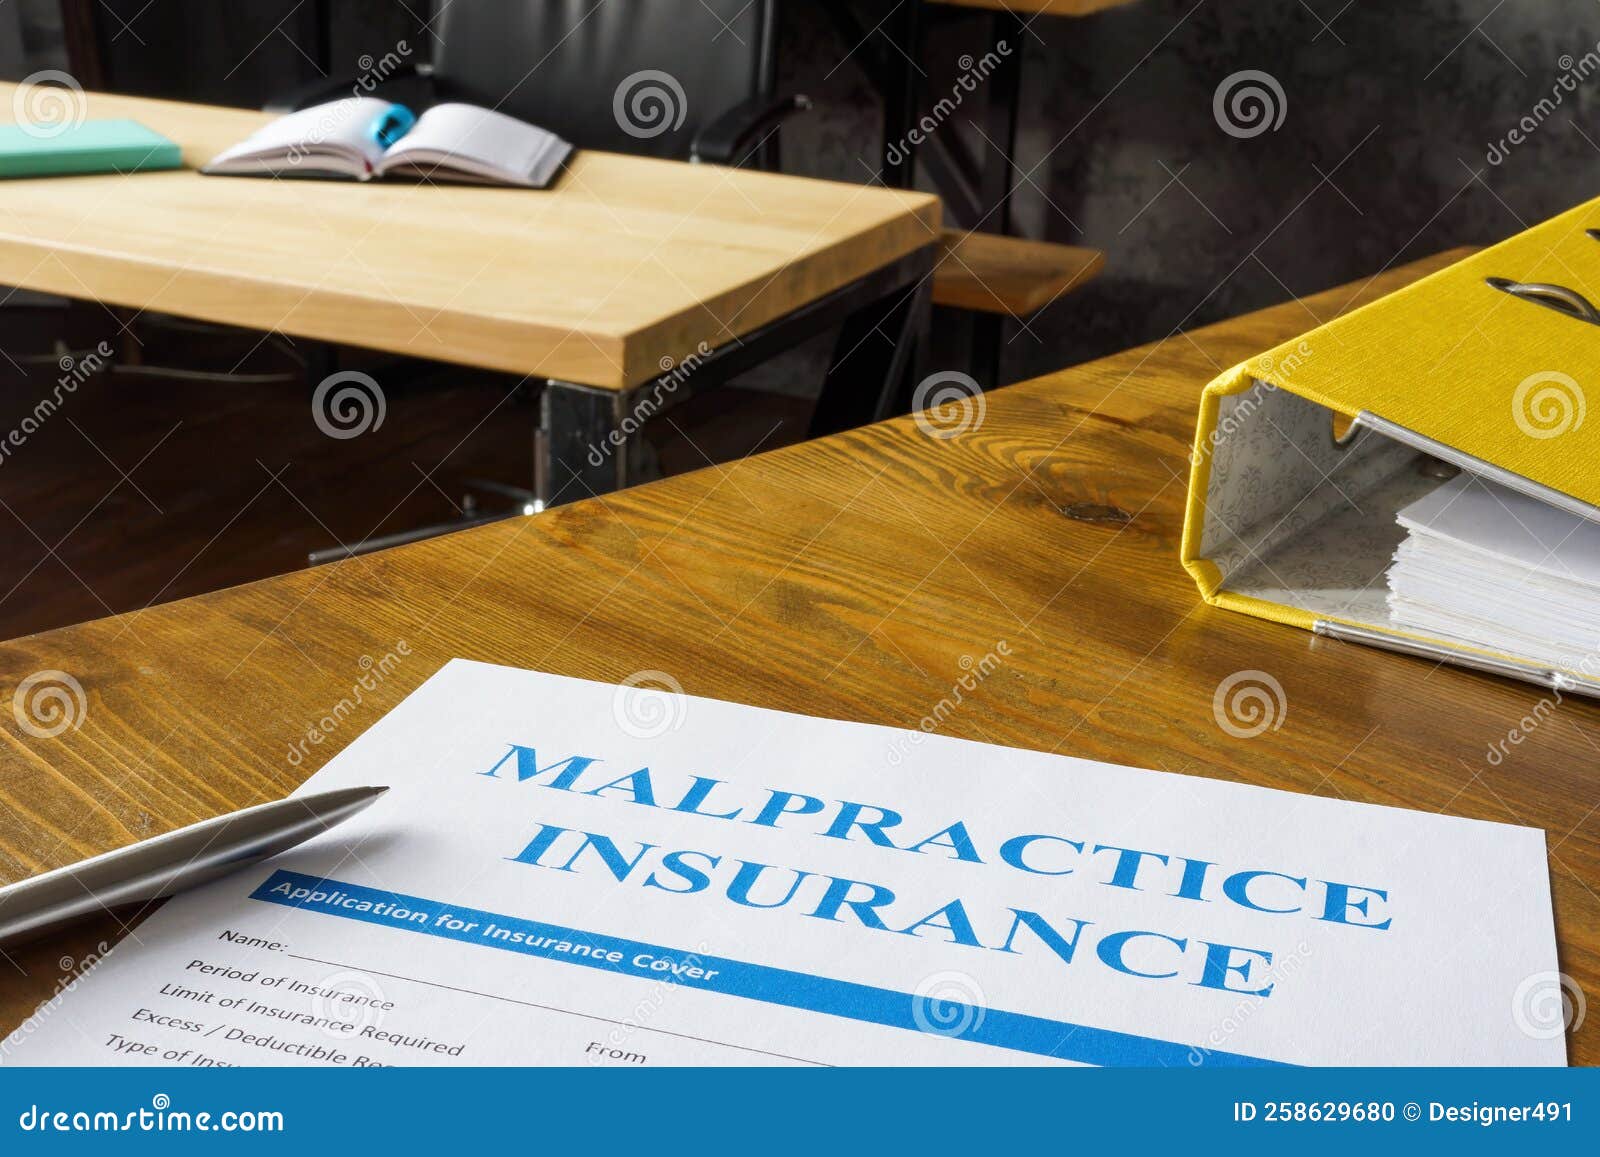 table with malpractice insurance application on it.